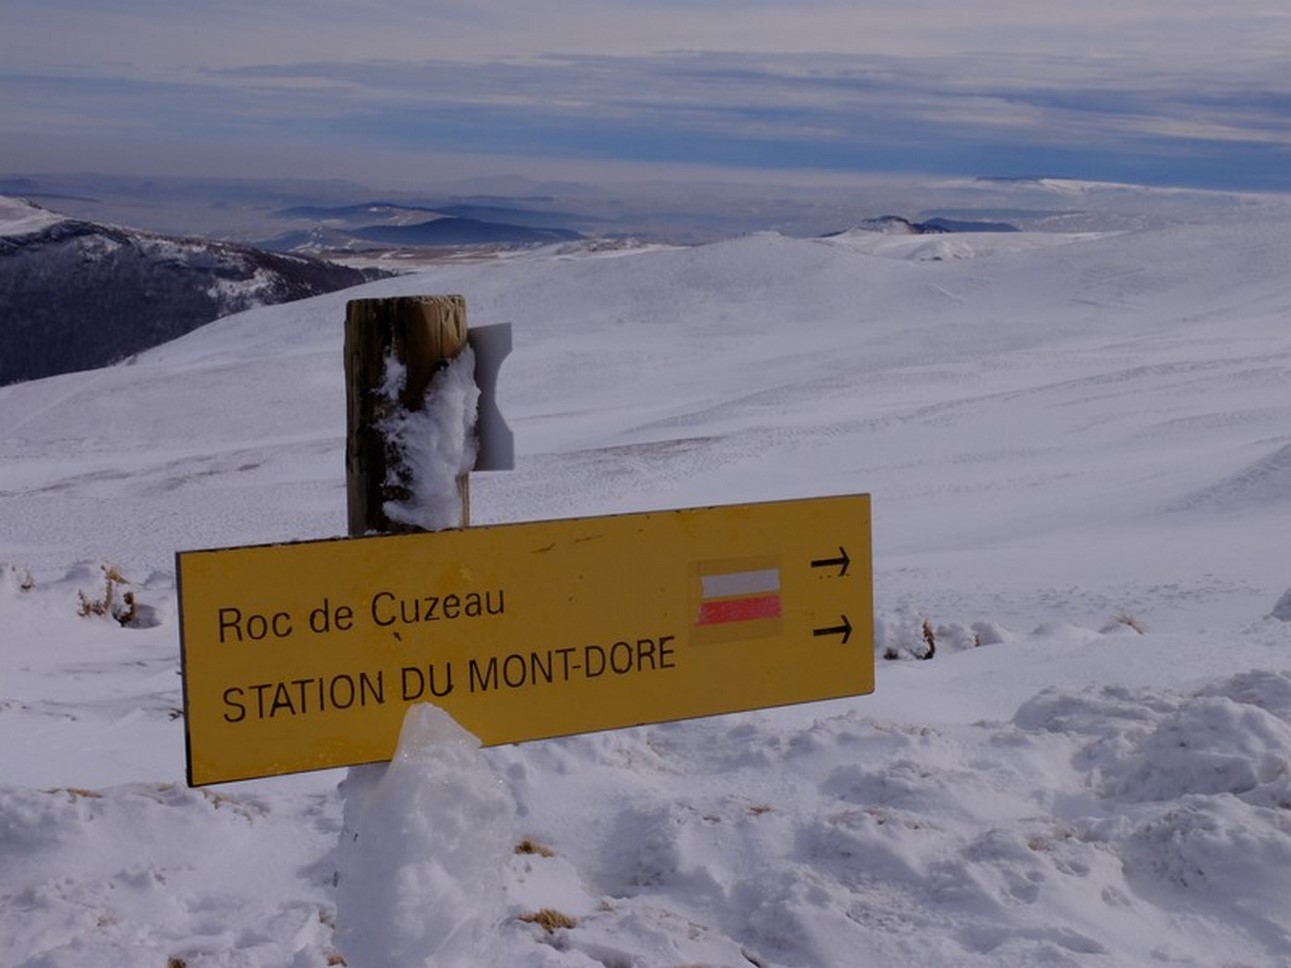 Hiking route under the snow in the Sancy